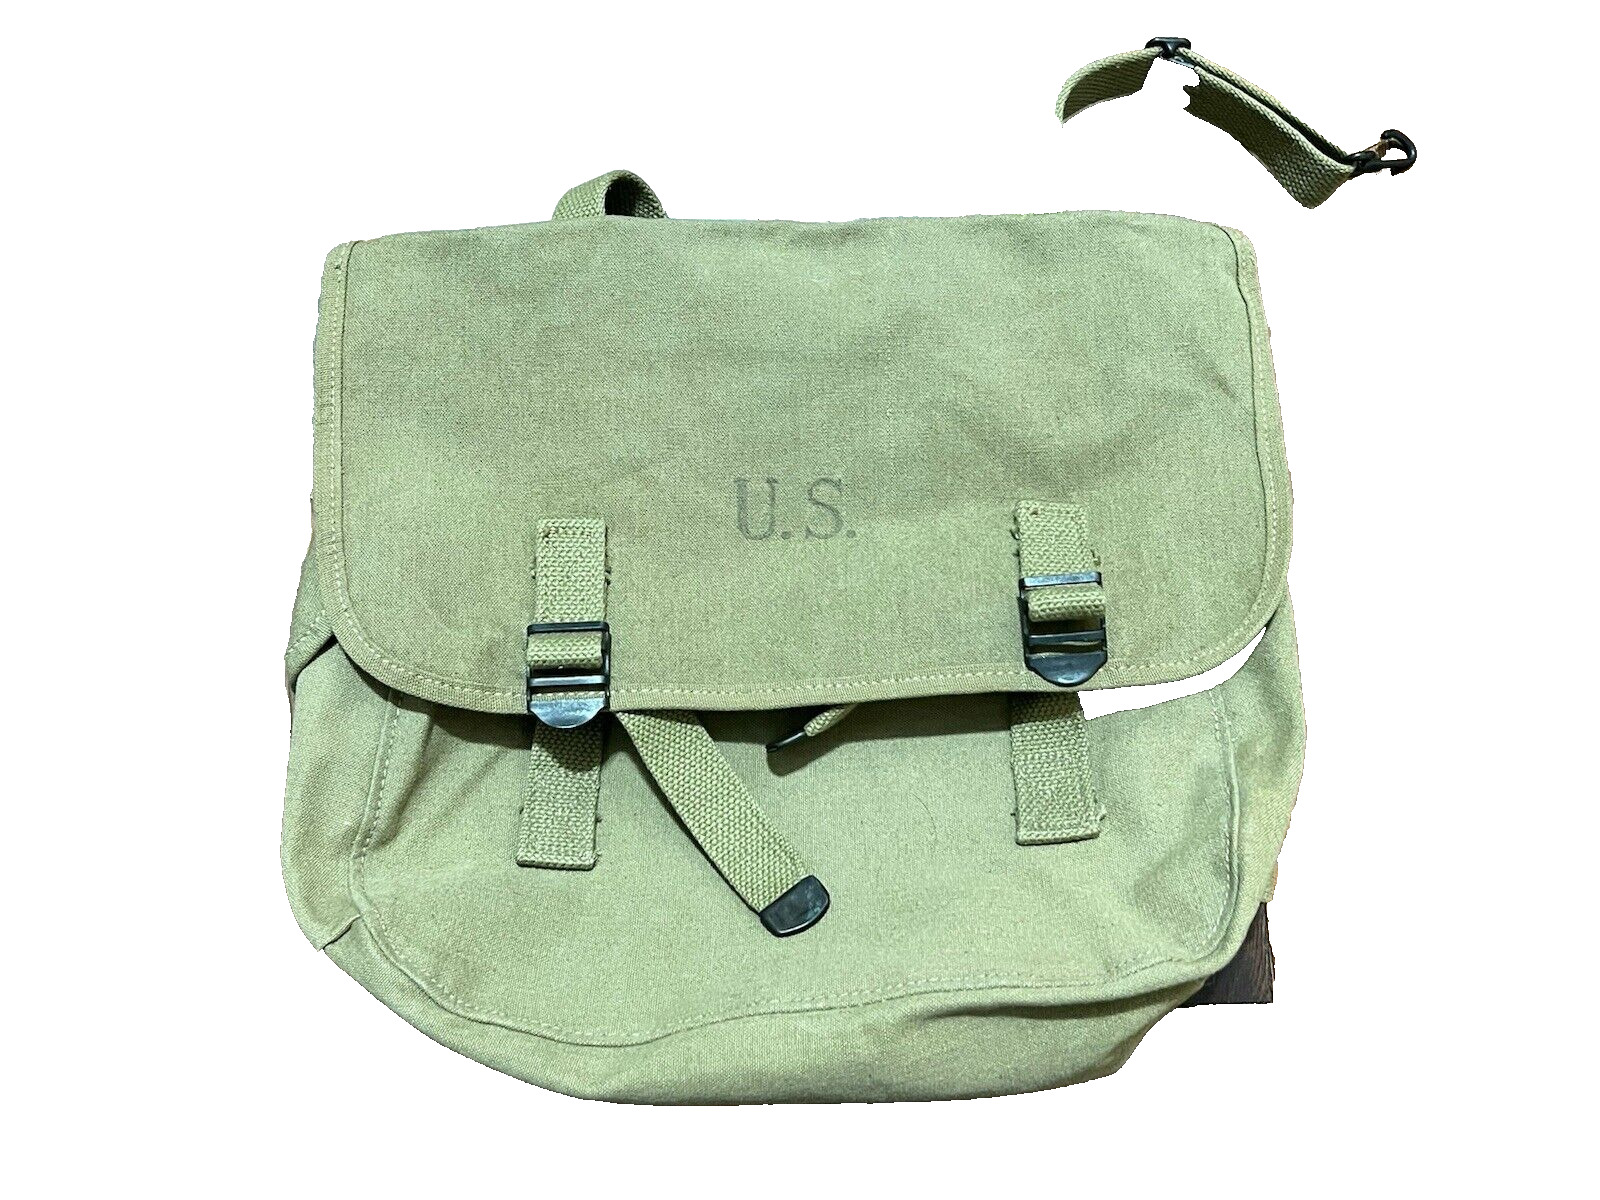 🔥RARE WWII US Army M1928 Musette Bag Dated 1941 + Shoulder Strap~Green~Airborne